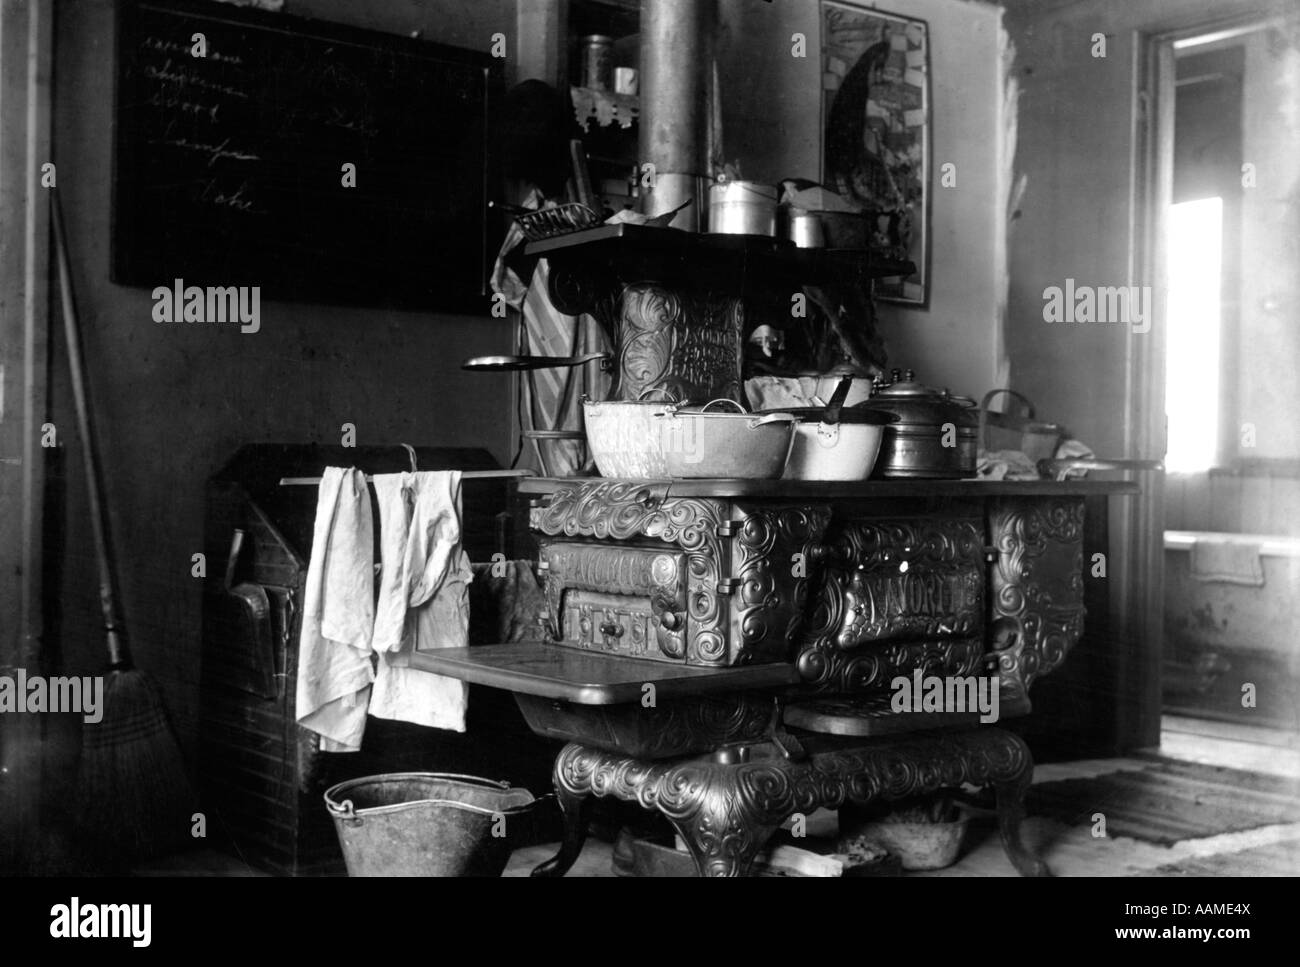 1890s 1900s TURN OF CENTURY CAST IRON WOOD BURNING COOK STOVE WITH POTS AND PANS IN KITCHEN Stock Photo